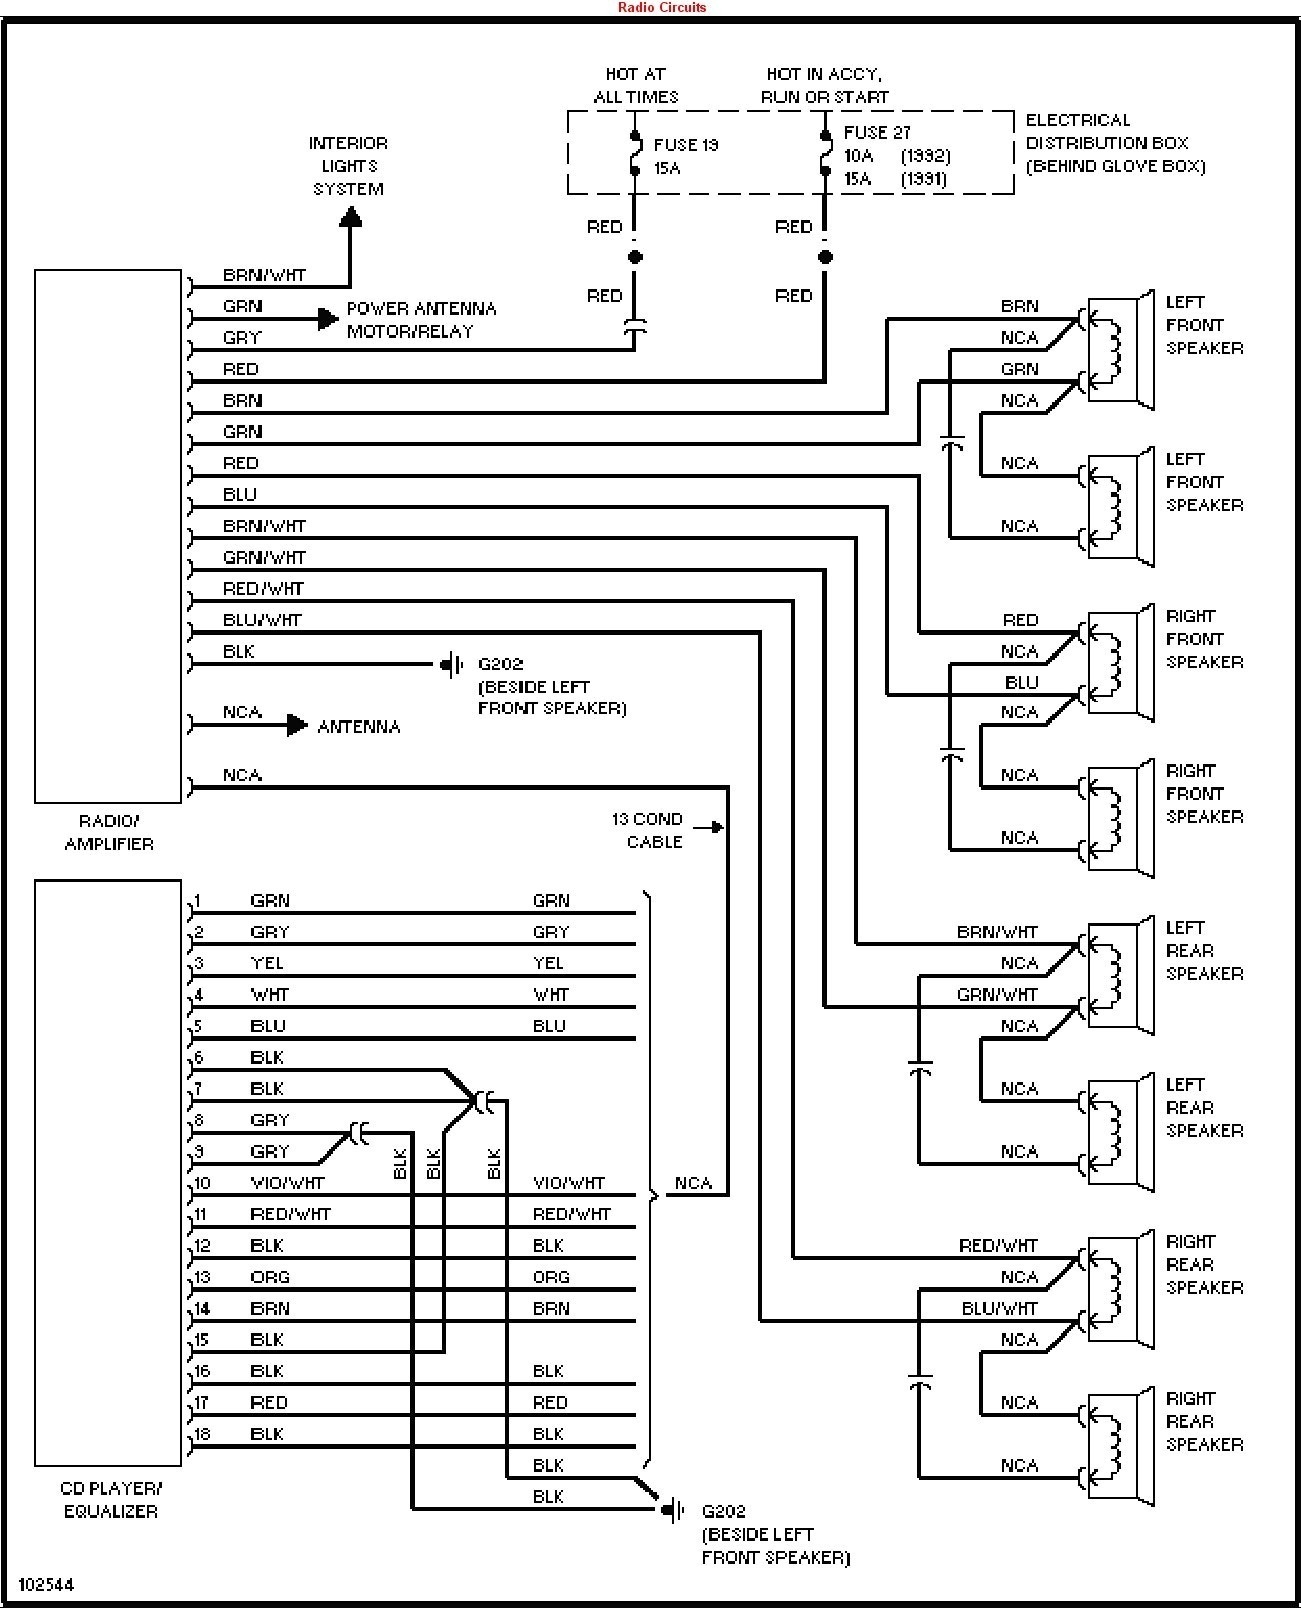 2001 Dodge Neon Stereo Wiring Diagram from mainetreasurechest.com